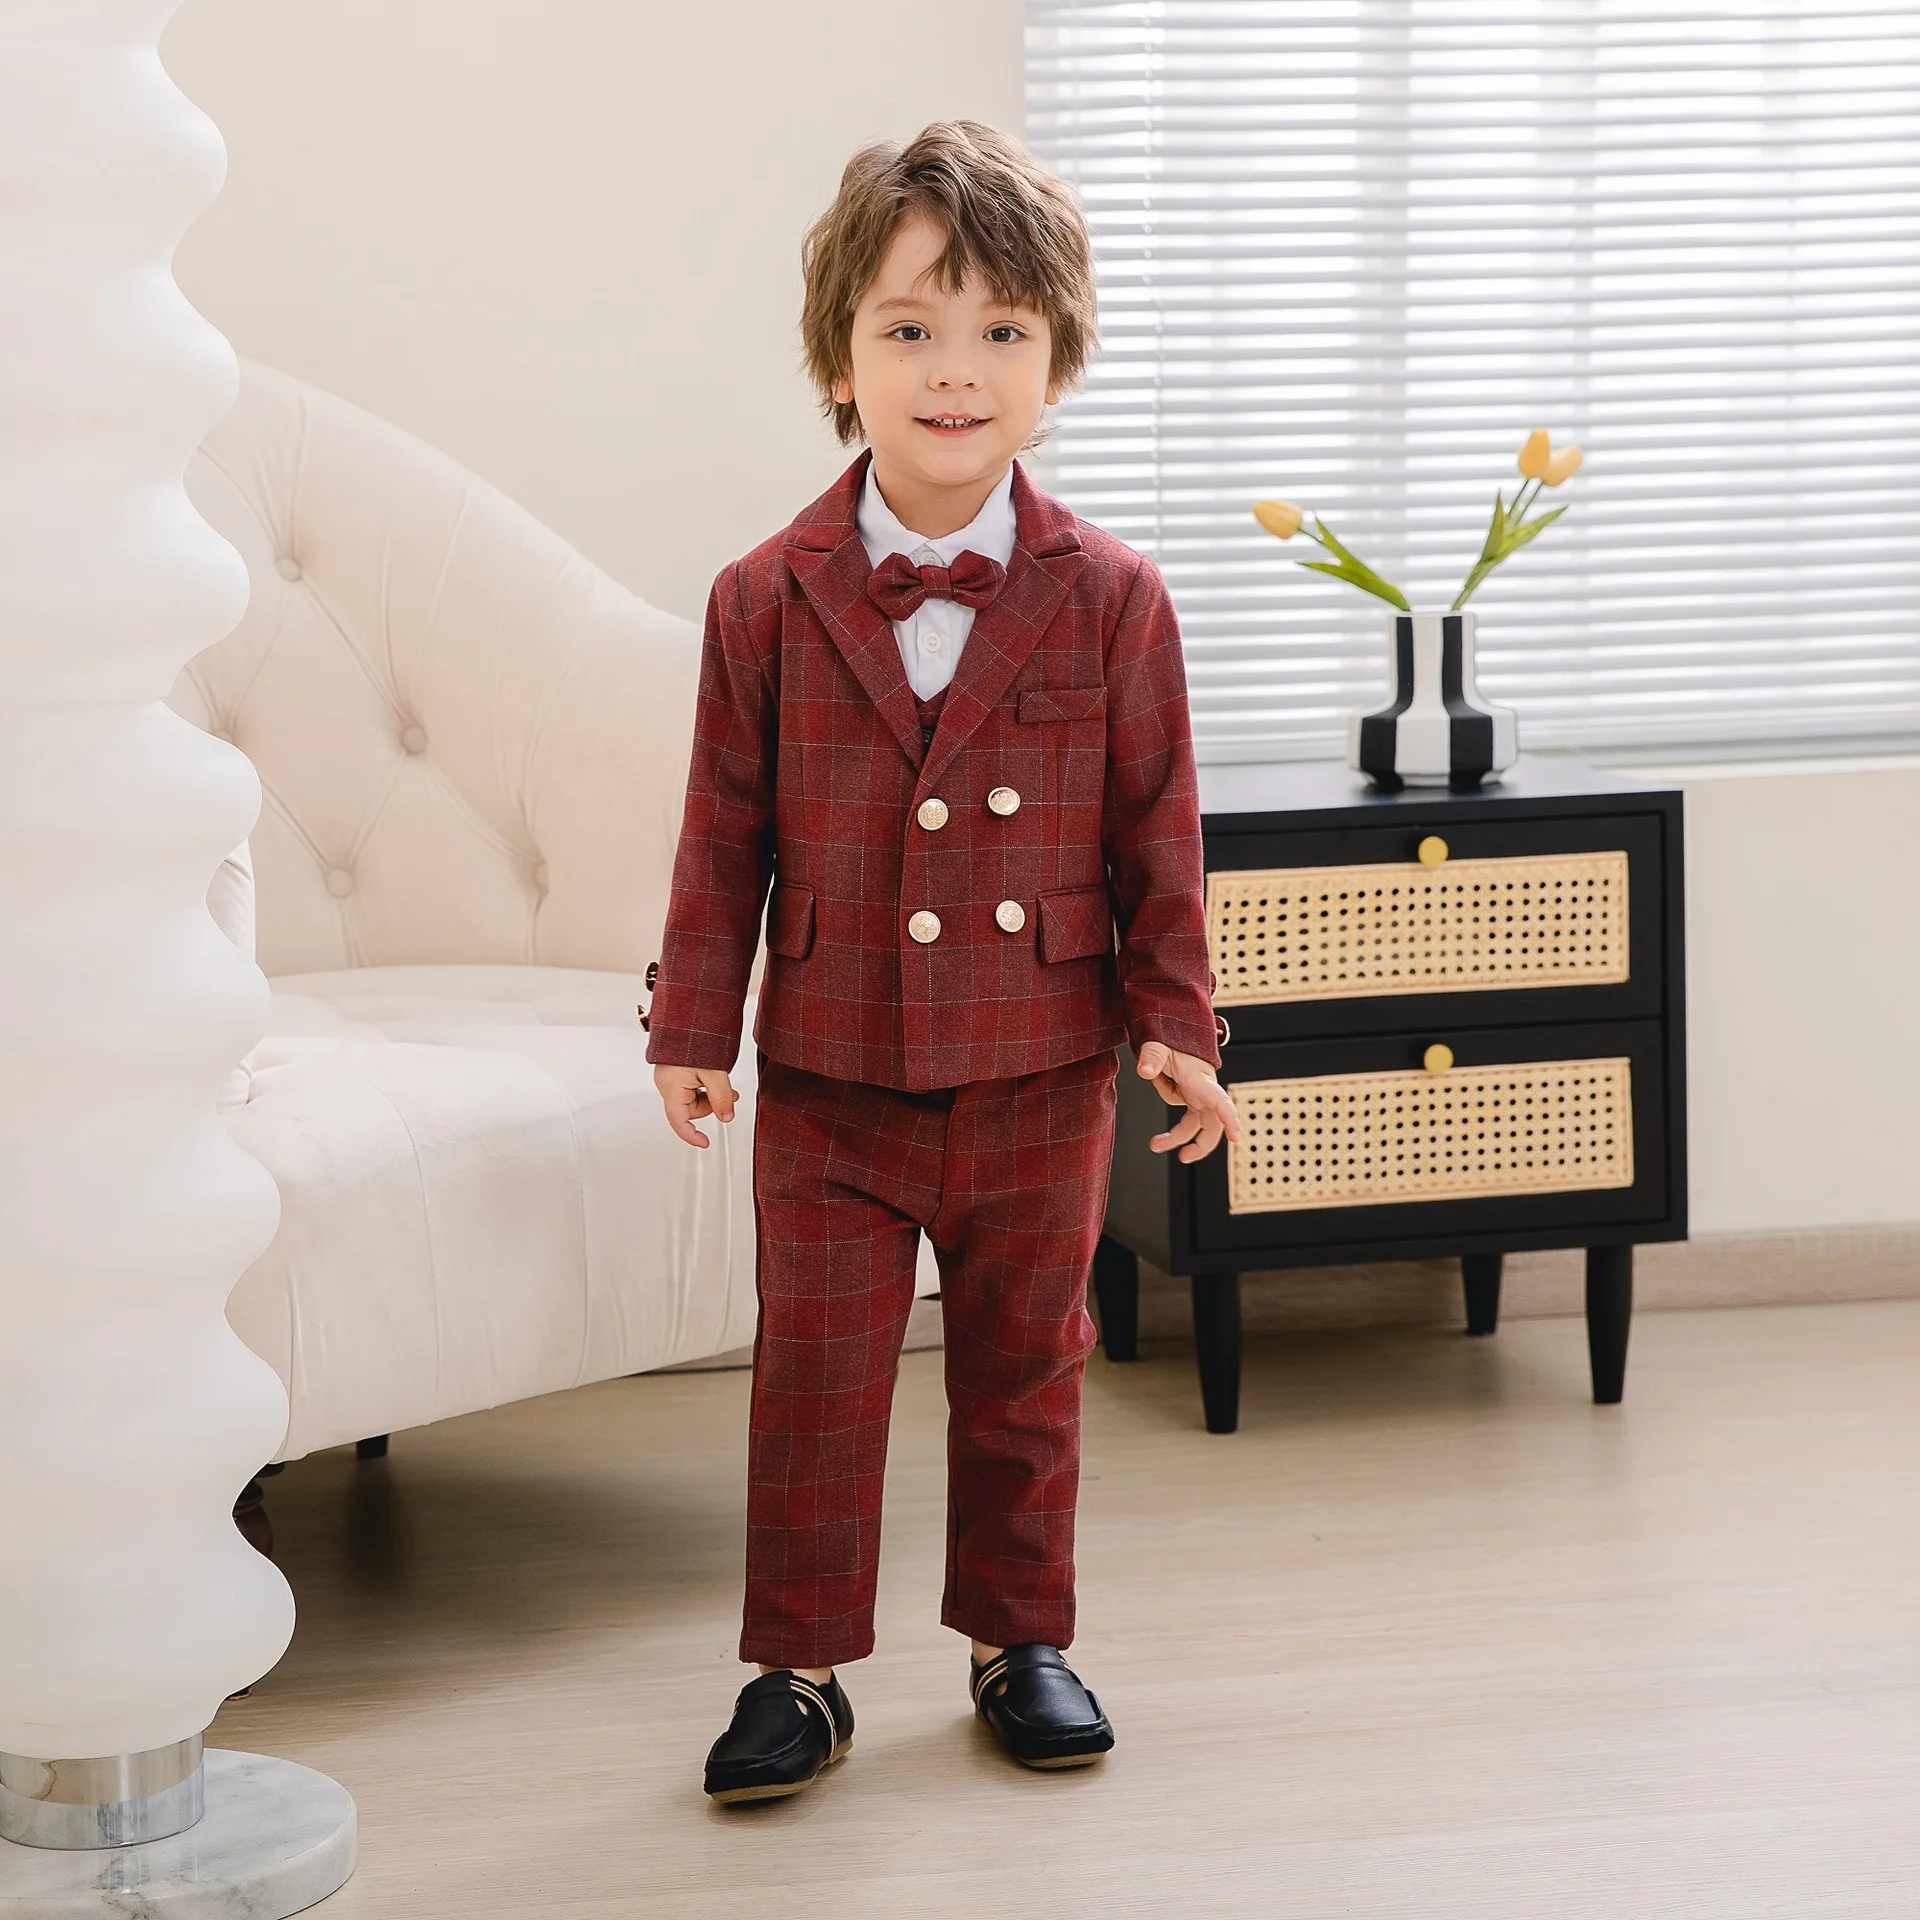 Buy THE DUBAI STUDIO Baby Boy's Sky-Blue Cotton Party Suits with Jacket+  Vest+ Pant+ Bow-tie (Set of 4) at Amazon.in